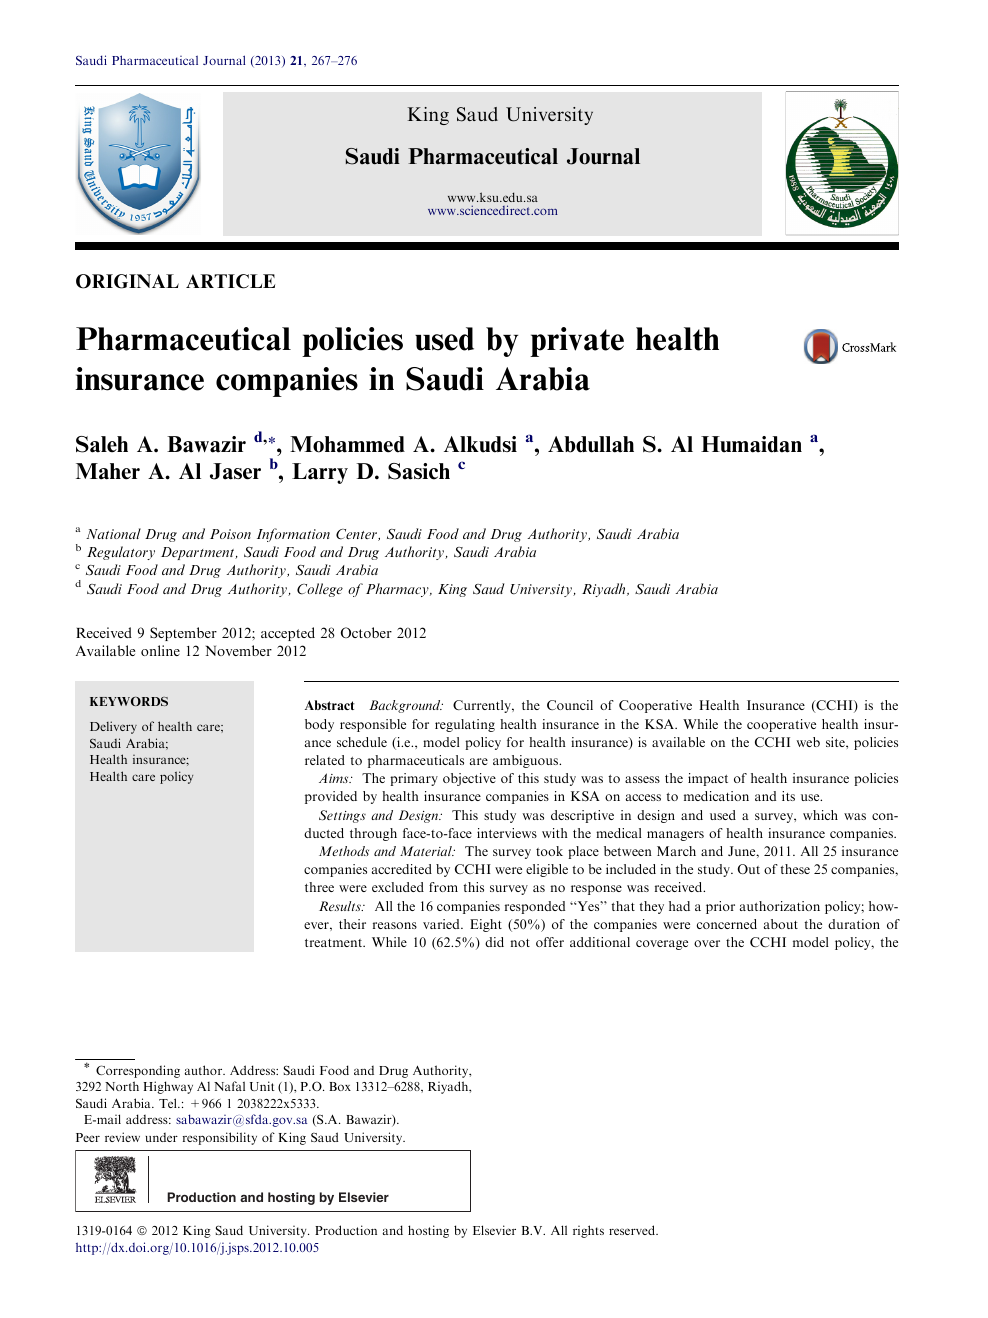 Pharmaceutical Policies Used By Private Health Insurance Companies In Saudi Arabia Topic Of Research Paper In Clinical Medicine Download Scholarly Article Pdf And Read For Free On Cyberleninka Open Science Hub